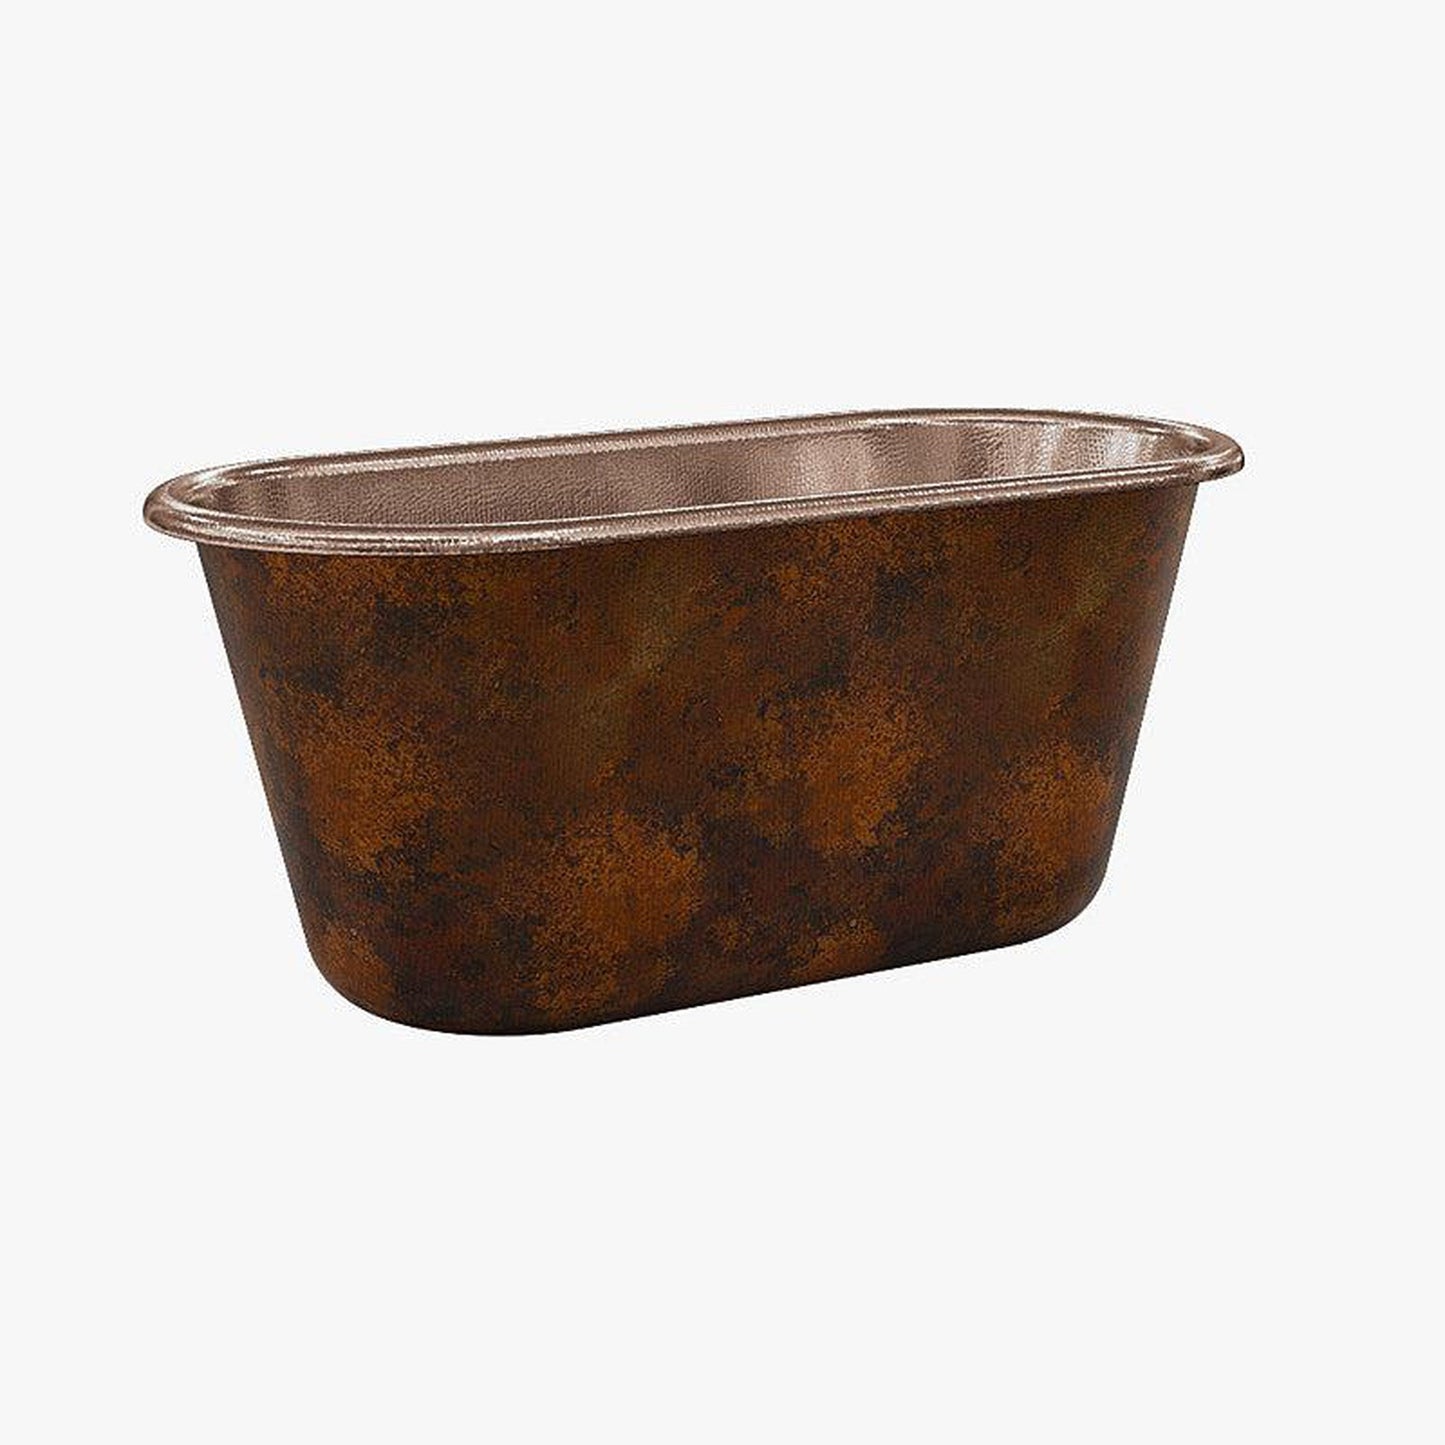 CopperSmith Heritage HX1 60" x 31" x 31" 16-Gauge Fire Copper Freestanding Bathtub With Polished Copper Interior and Oil Rubbed Bronze Push Button Tub Drain and Polished Chrome Tub Filler